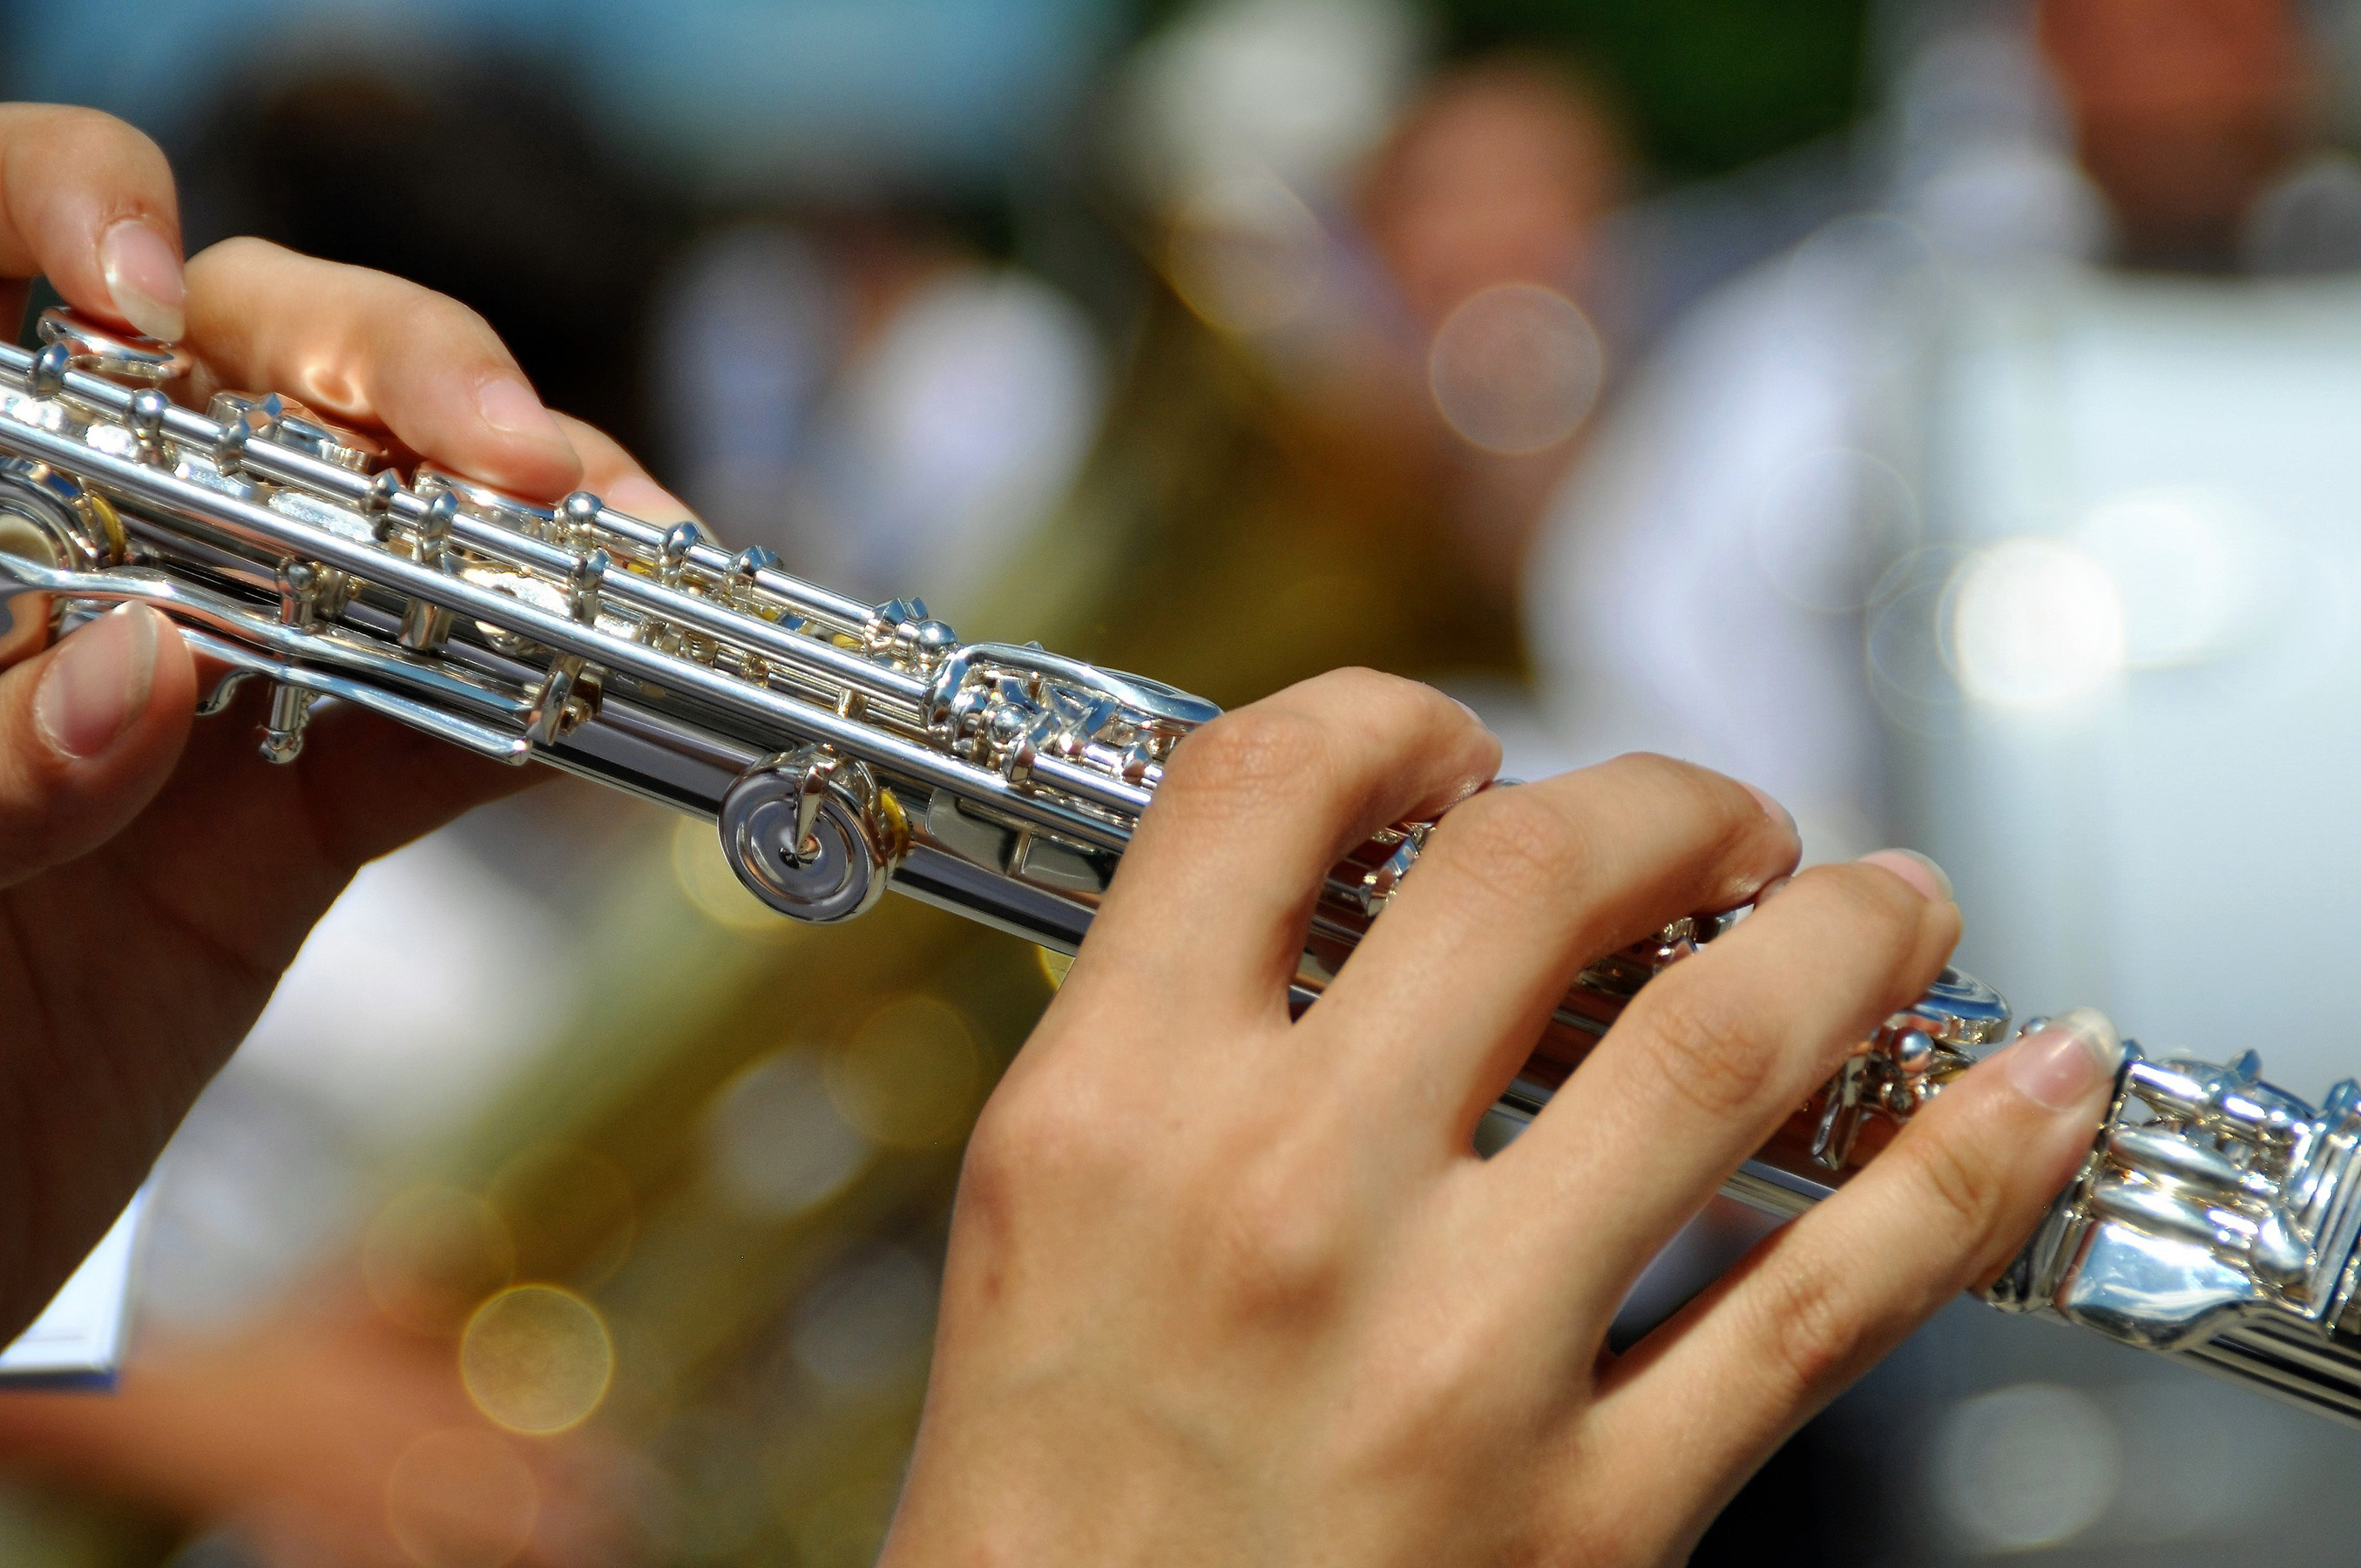 Hands playing Flute image - Free stock photo - Public Domain photo